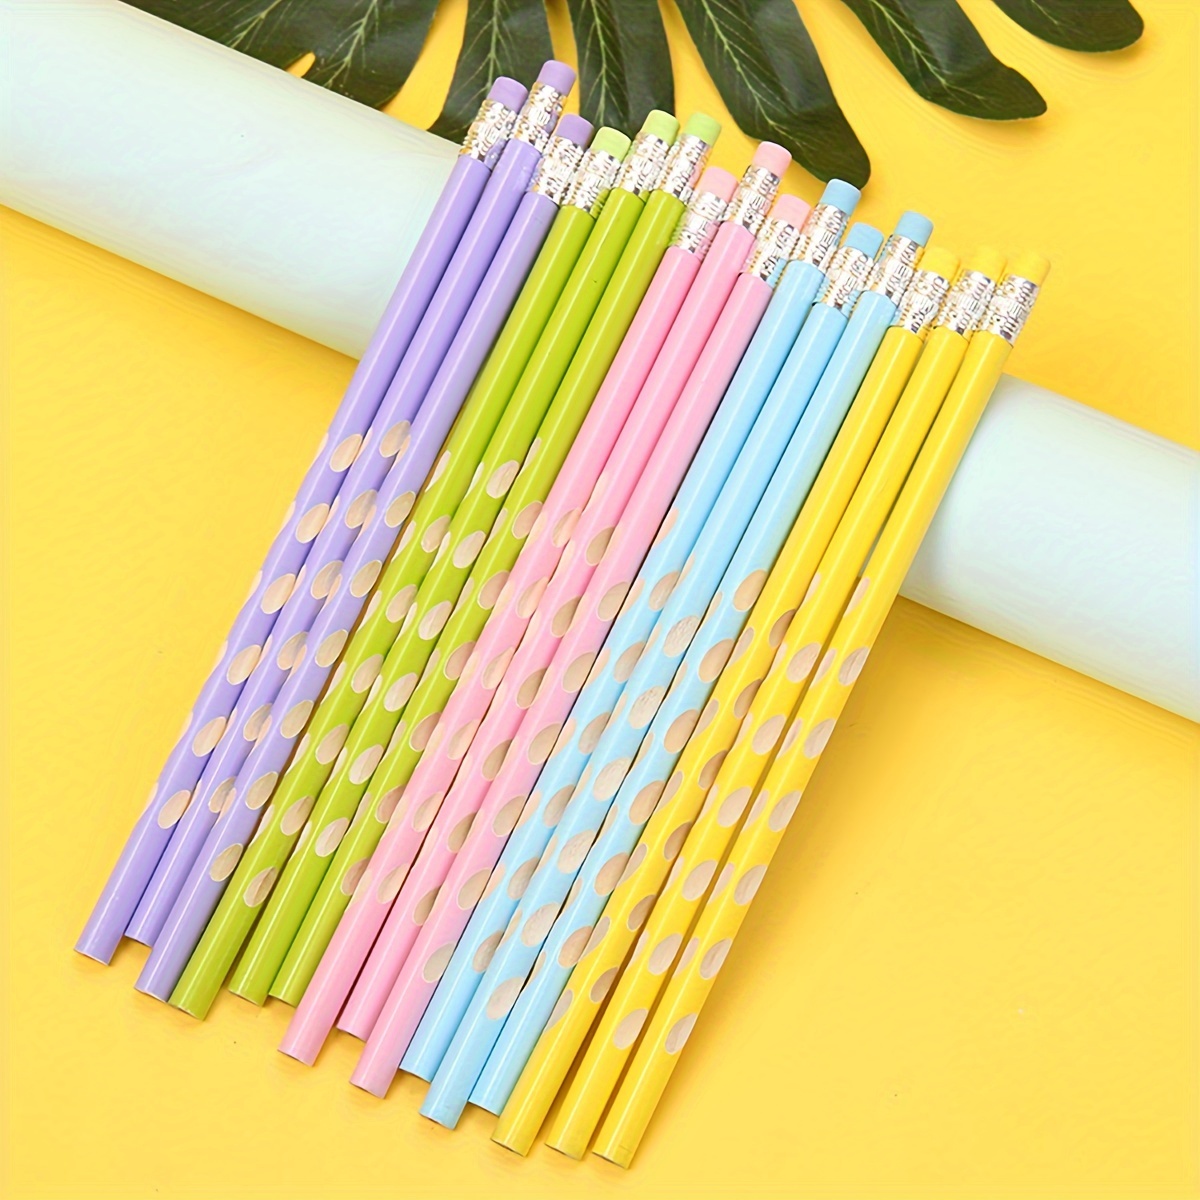 ADDY & PLUSY Molang 12 Colors Twist Colored Pencil Set Ver.02 / Set for  Adults and Kids, Drawing Pencils for Sketch, Arts, Korean Stationery (Pink)